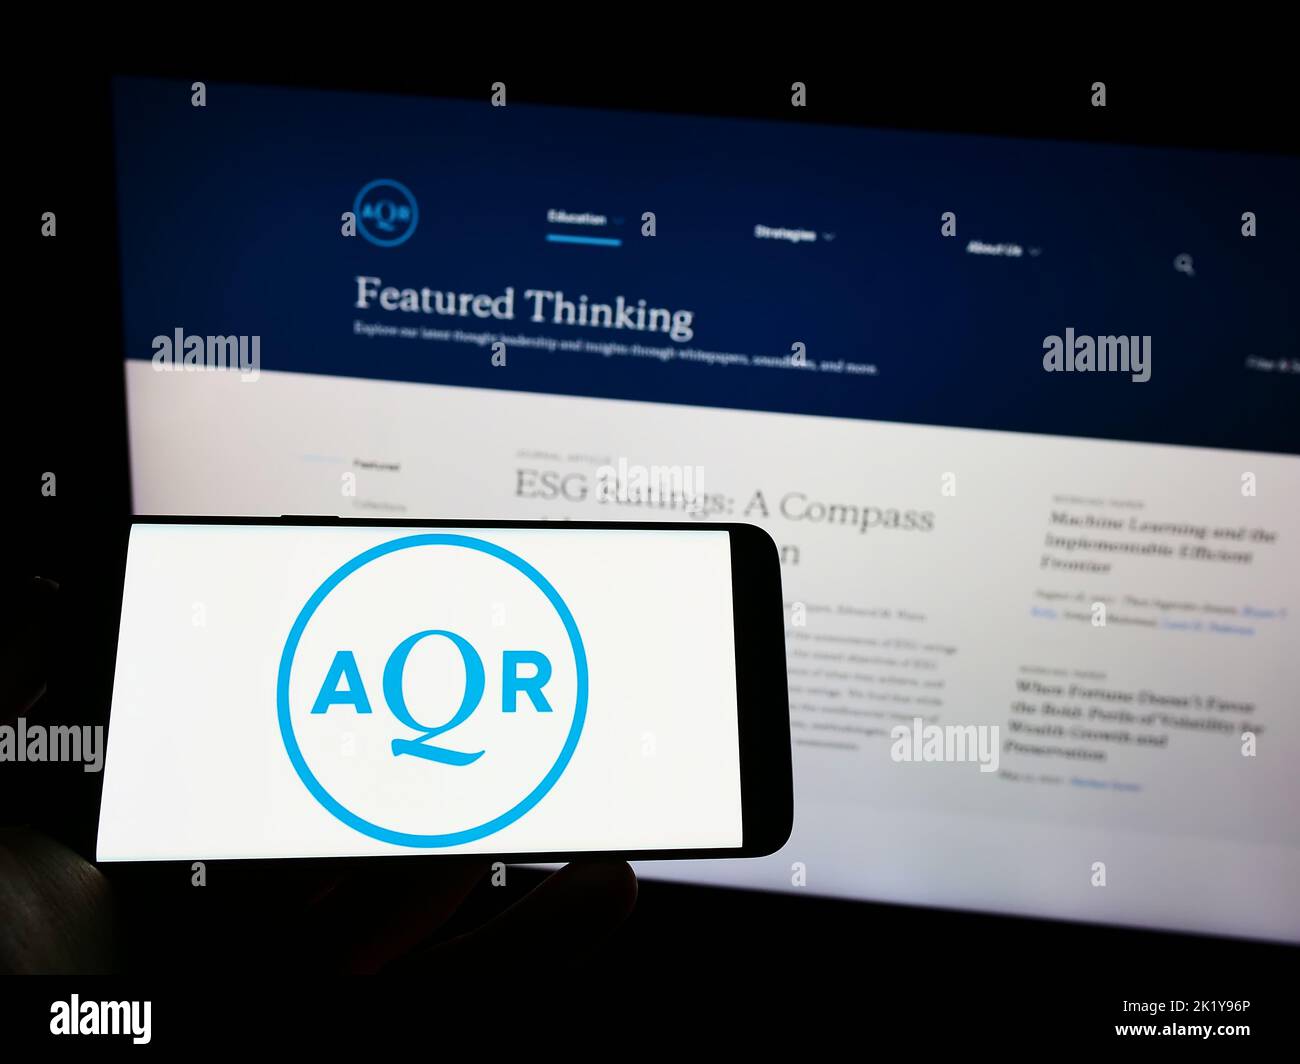 Person holding cellphone with logo of US investment company AQR Capital Management on screen in front of business web page. Focus on phone display. Stock Photo